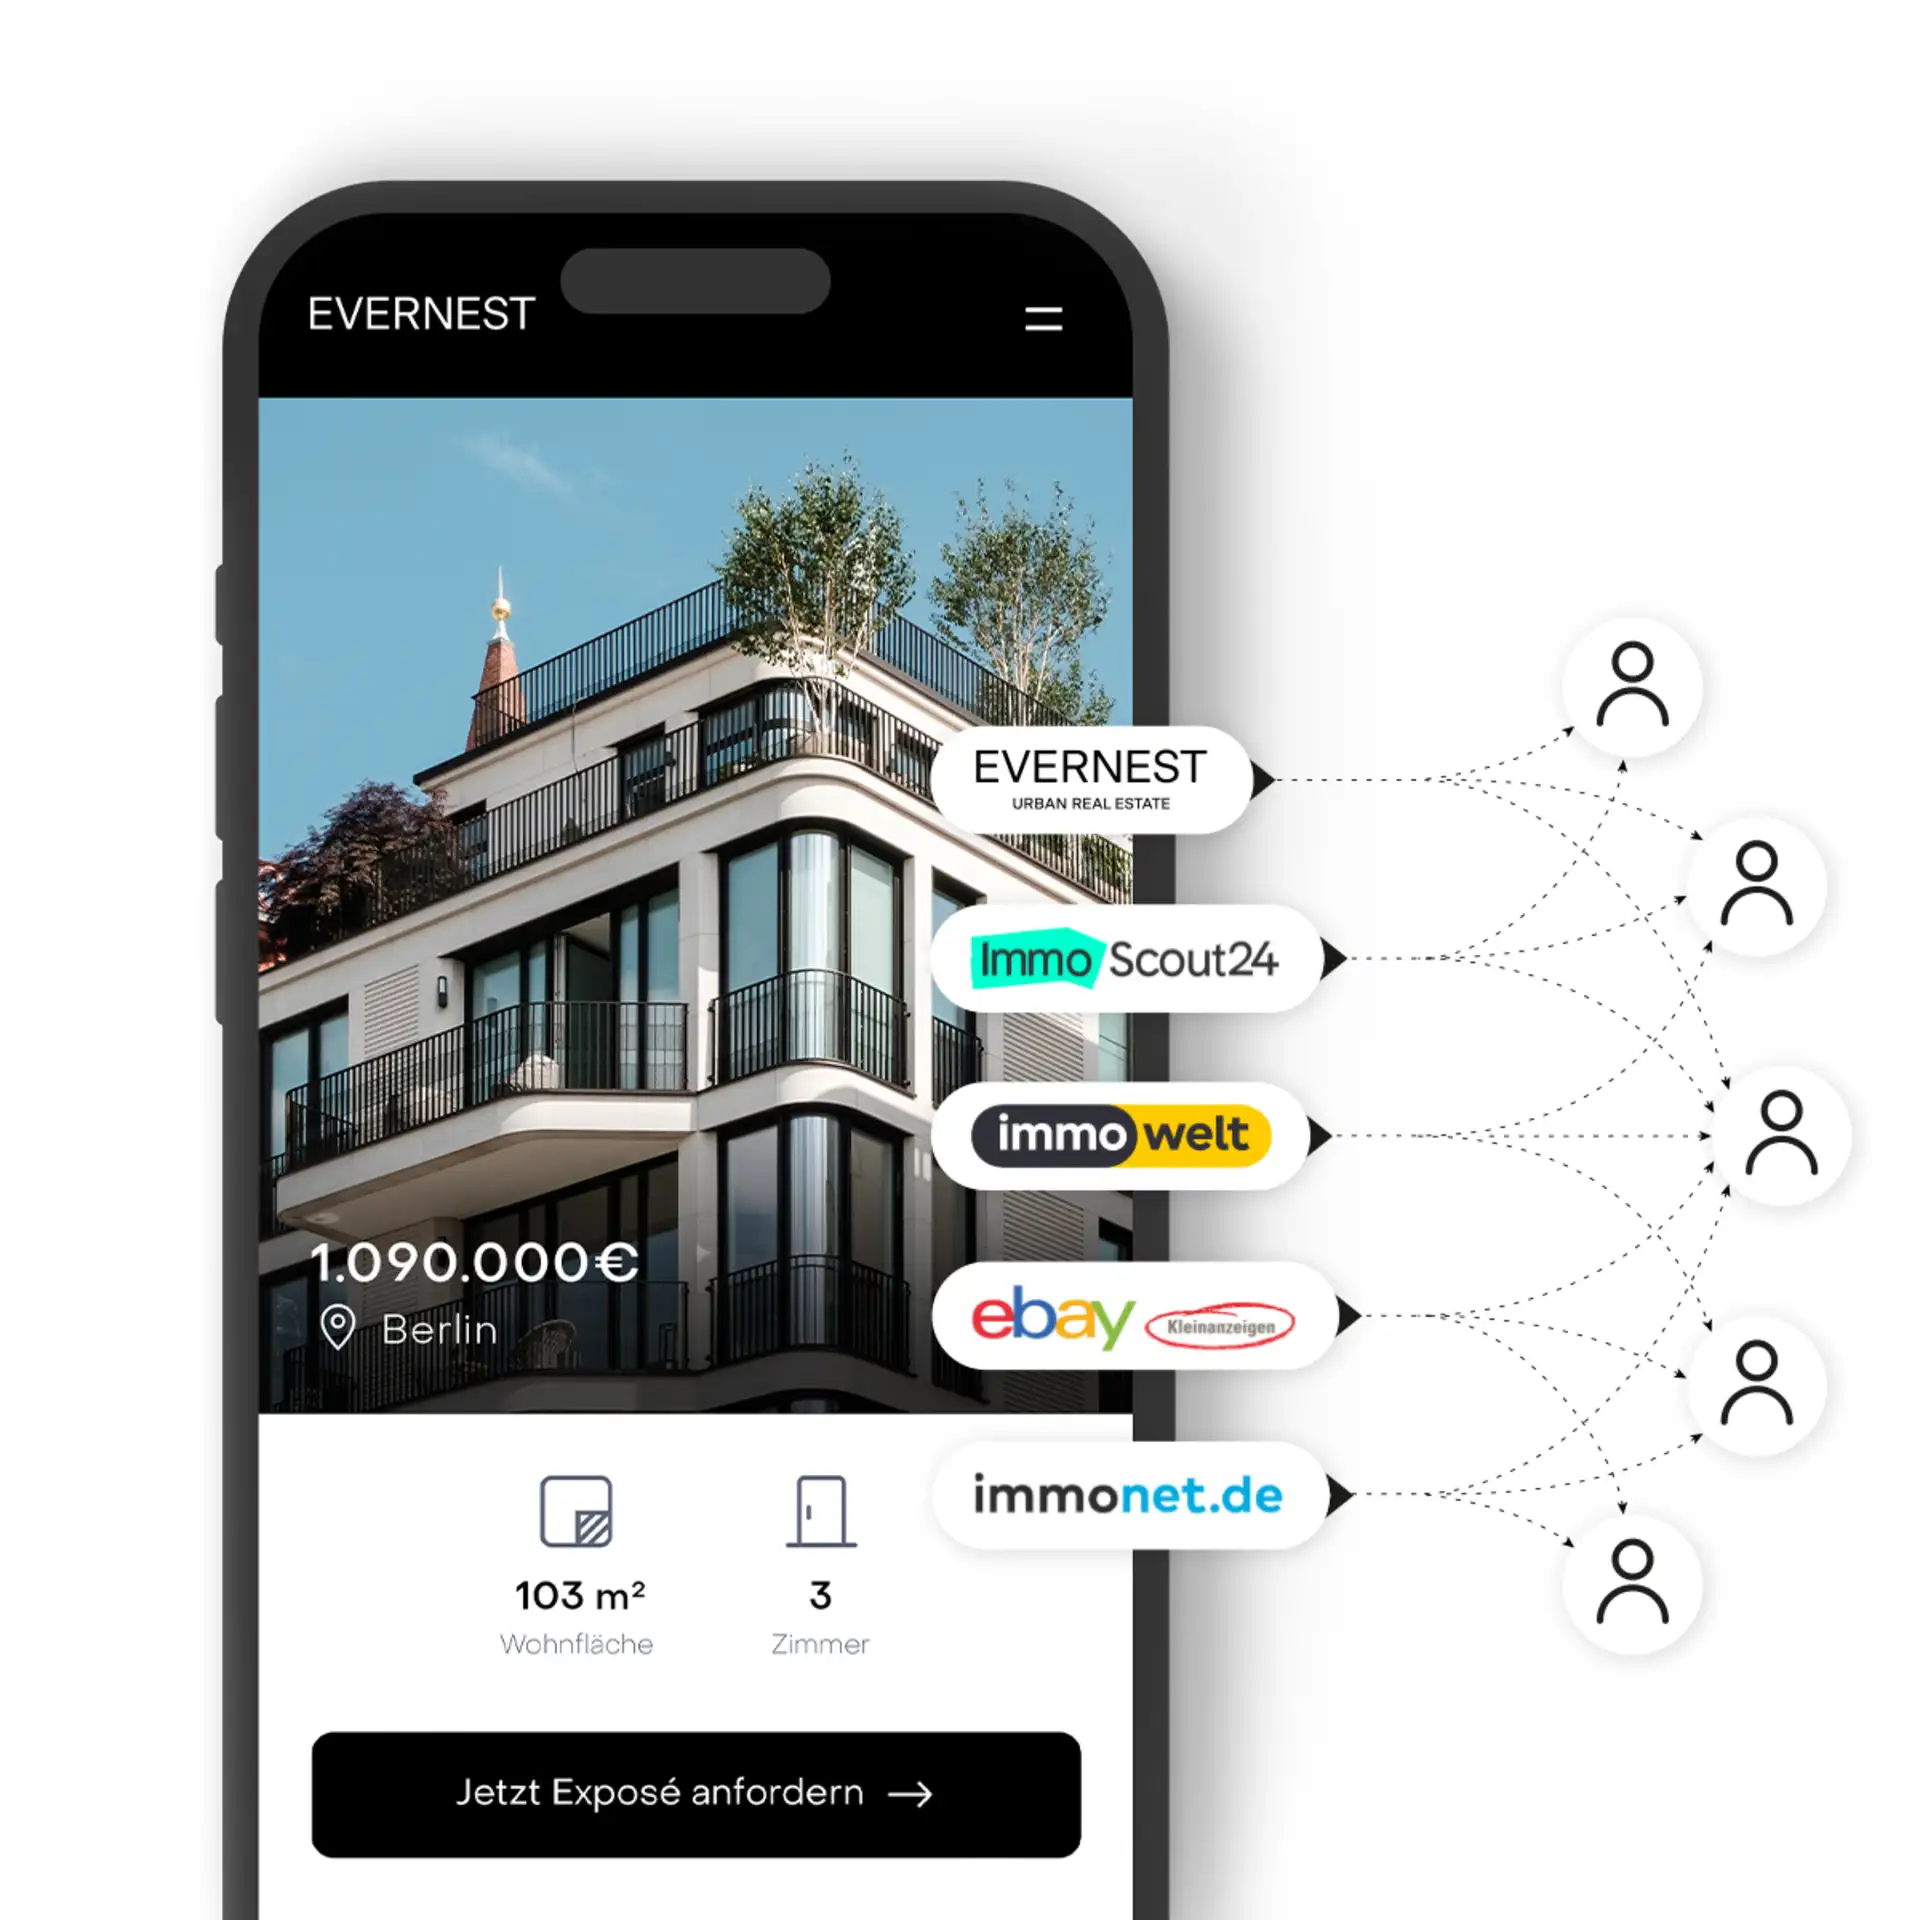 Evernest Portale Marketing Vertrieb Immobilienscout24 Immoscout Immonet